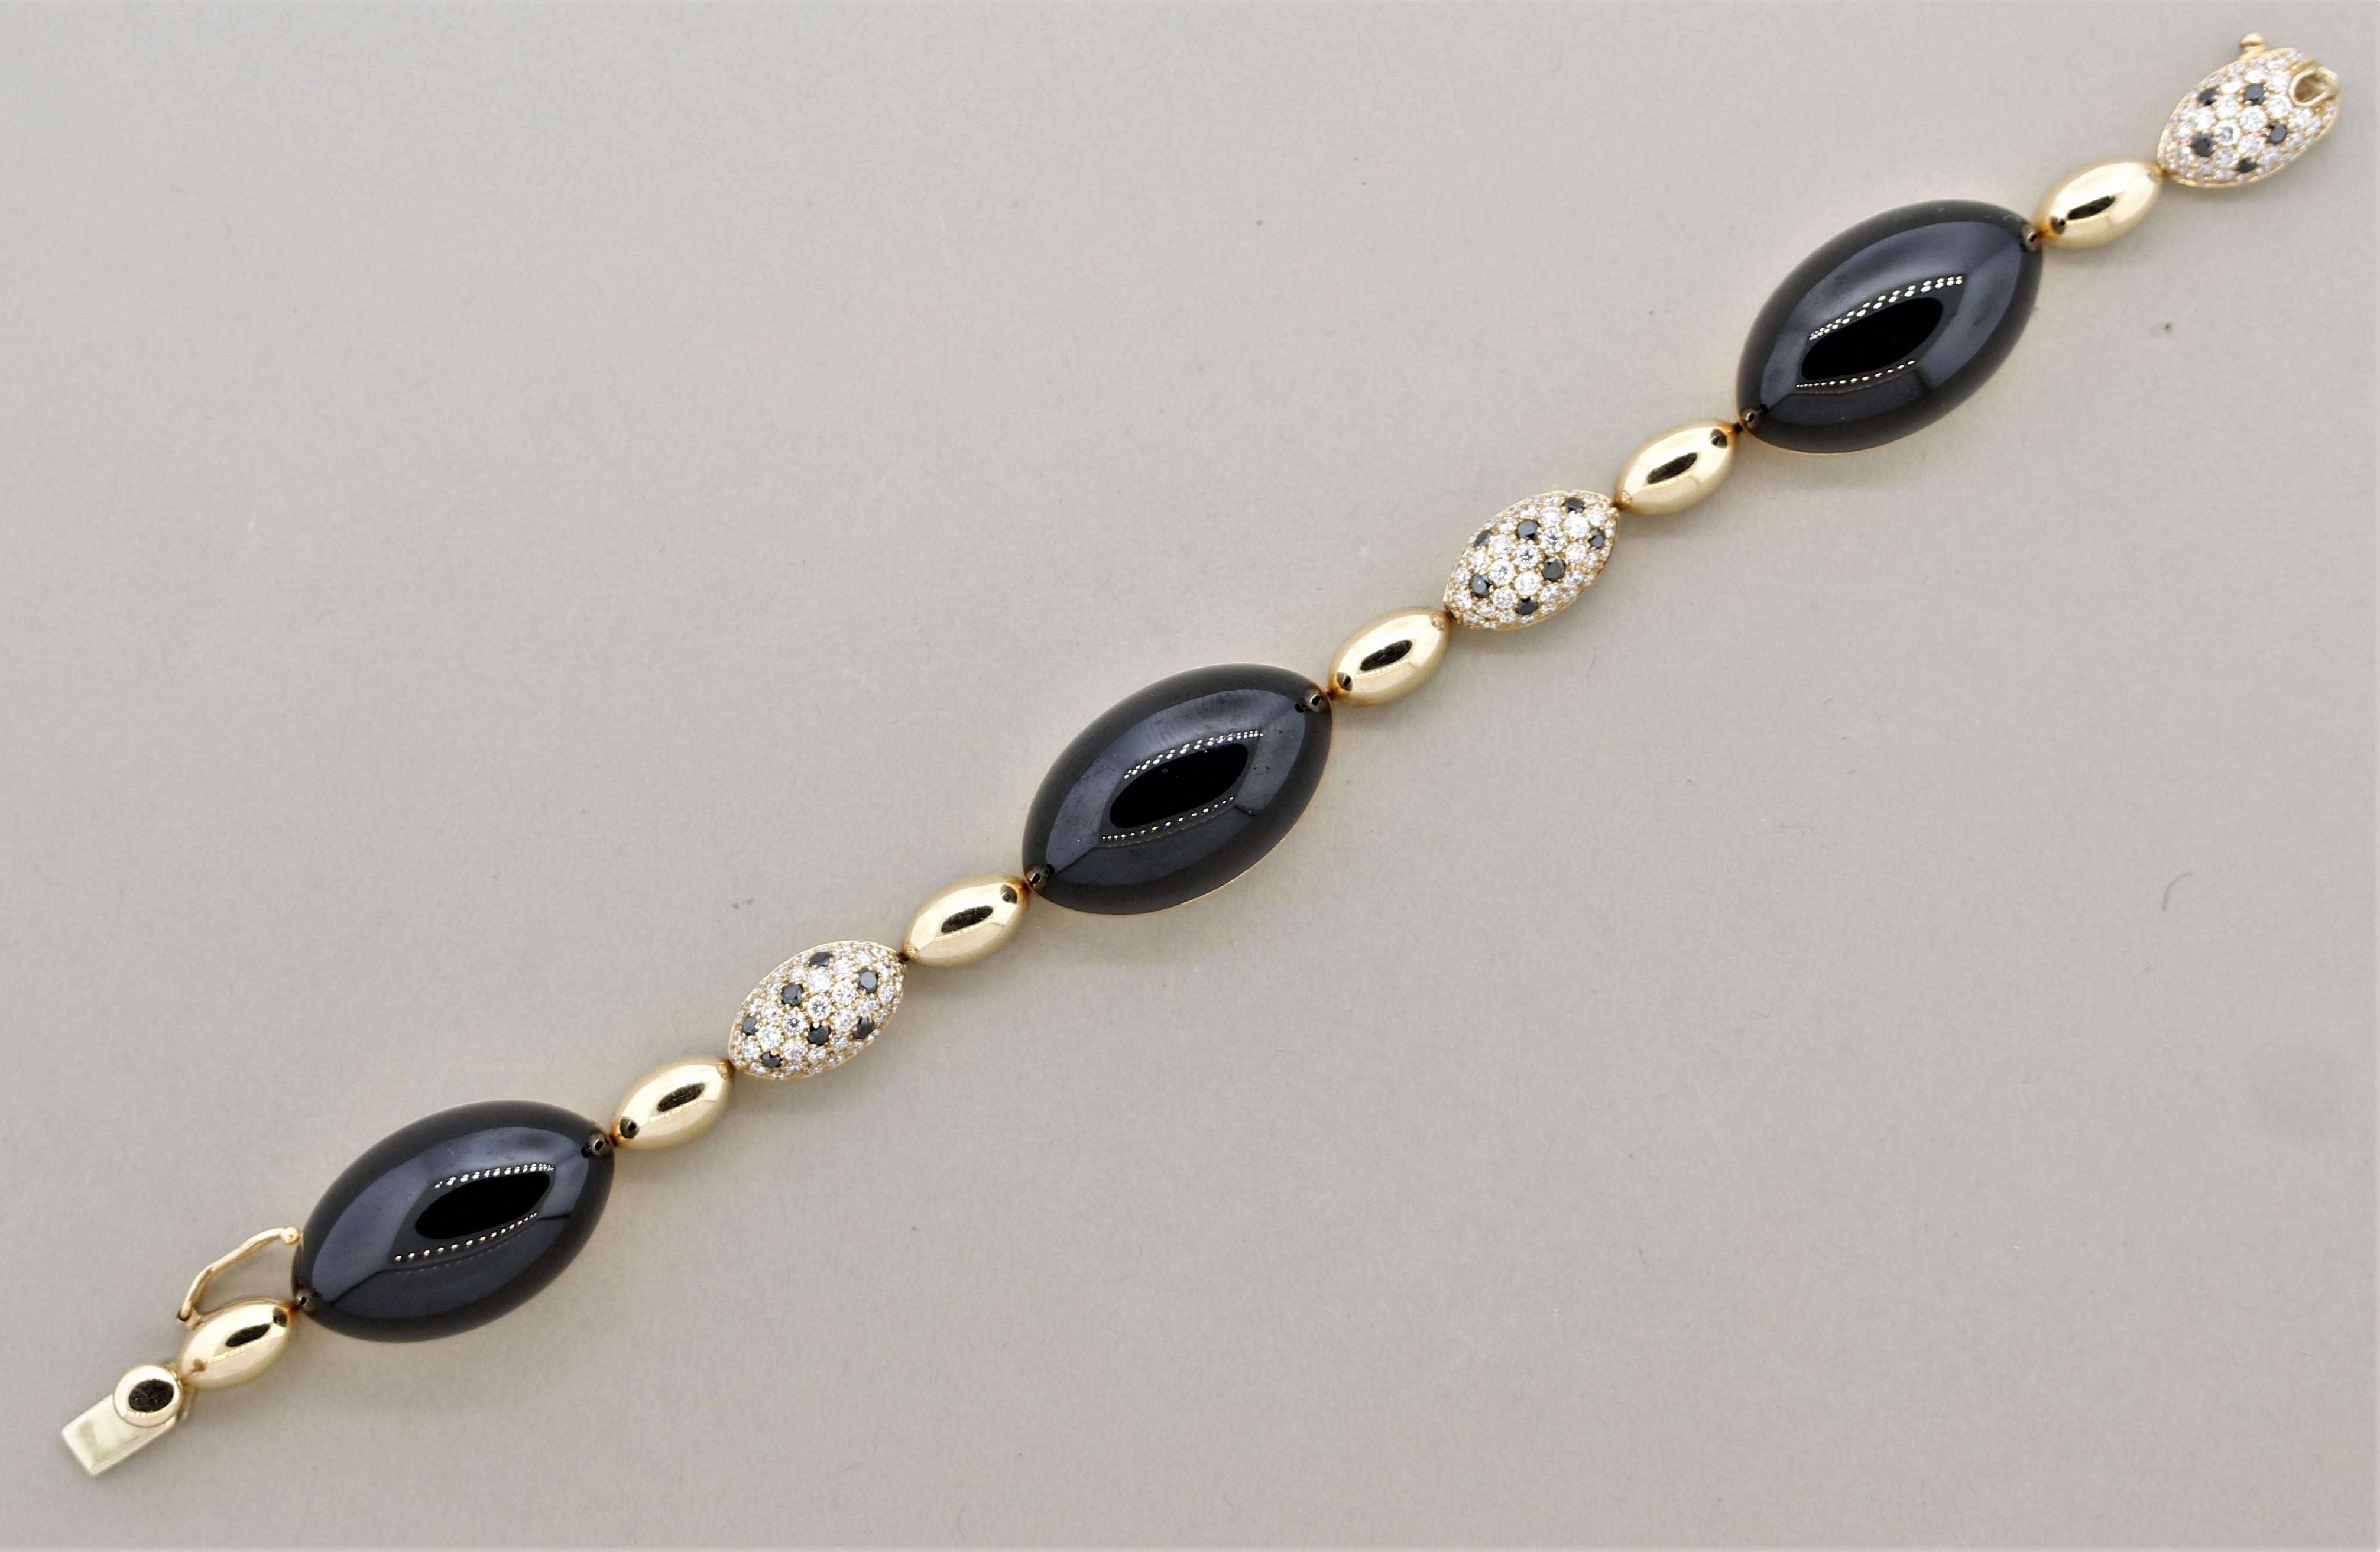 A wonderfully styled bracelet featuring white & black diamonds, onyx and brilliant contrast. There are 2.18 carats of fine white diamonds along with 0.57 carats of fancy black diamonds set together on 3 gold partitions. Between them are 3 large